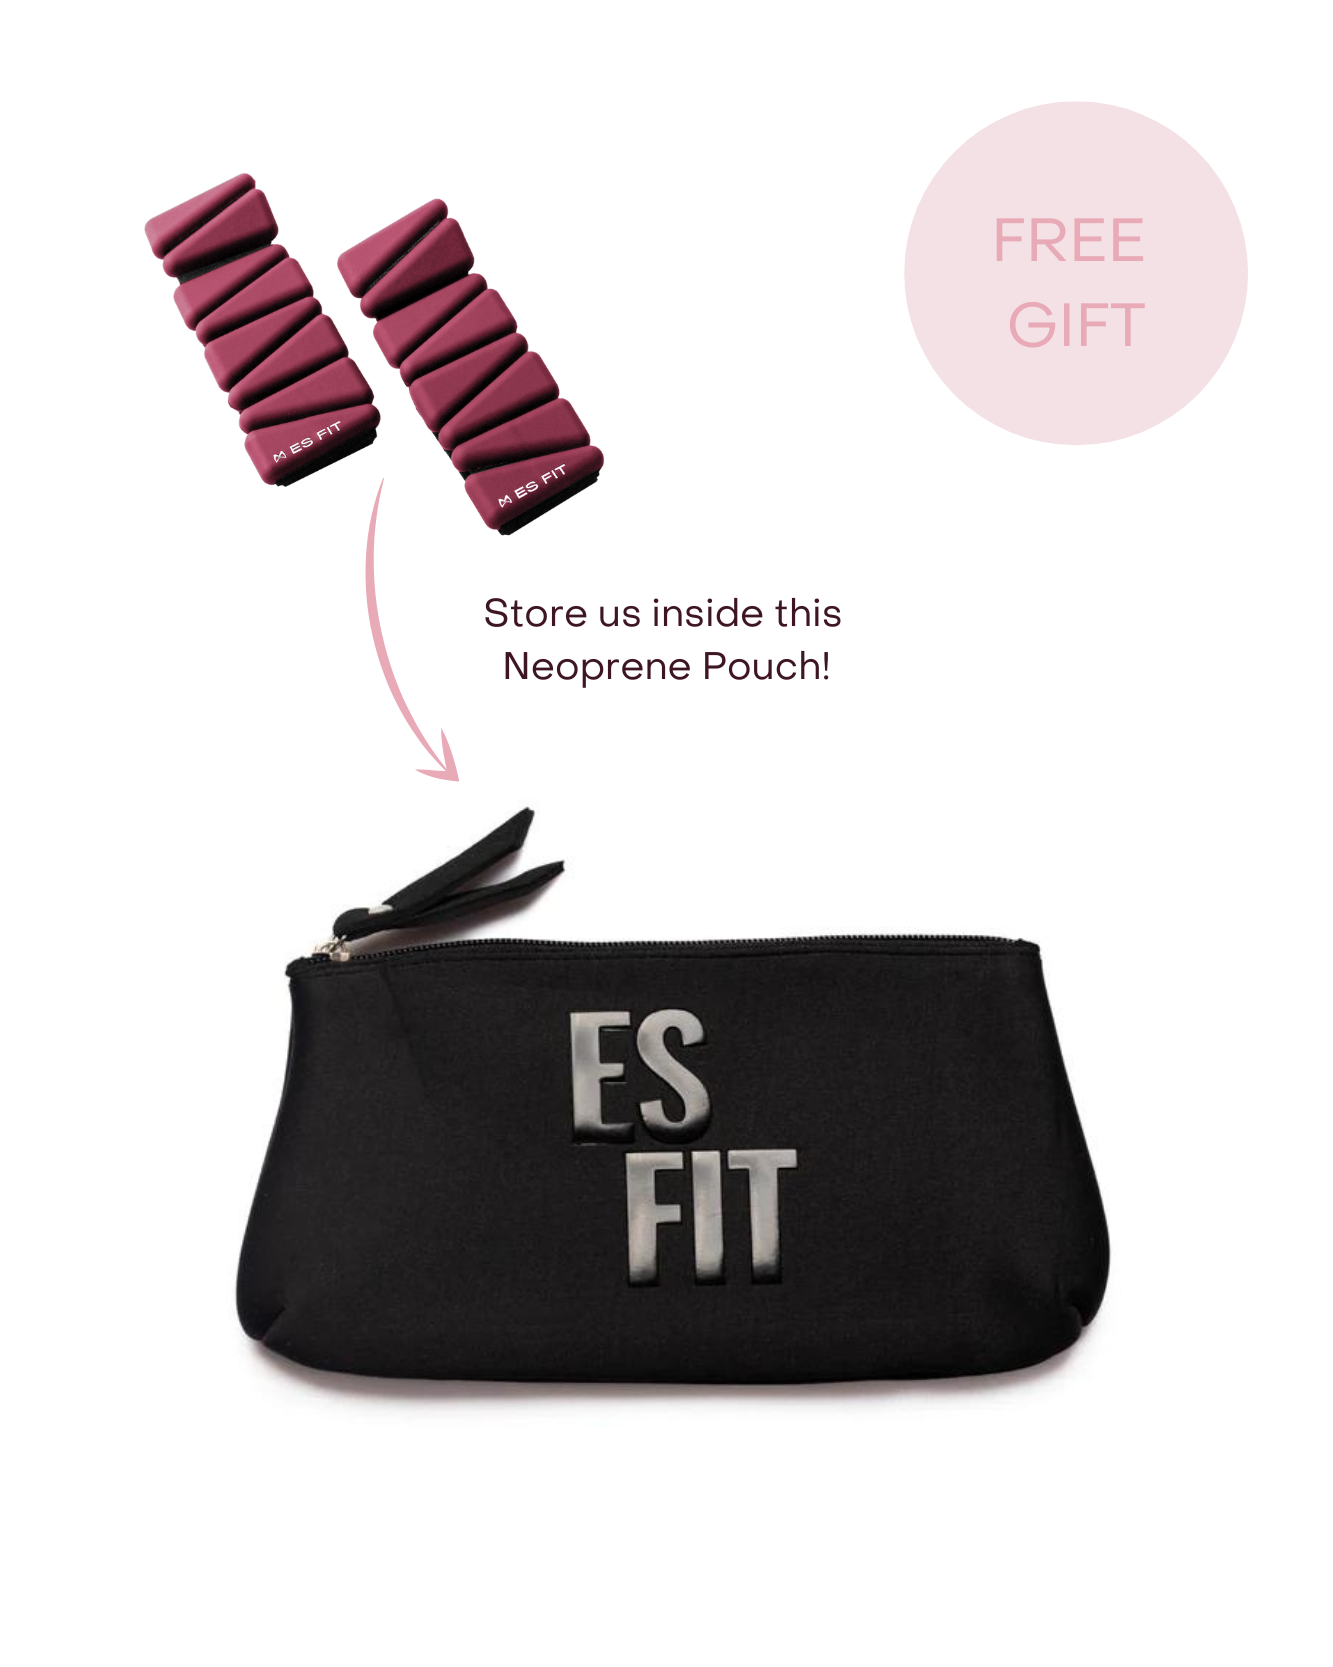 Everything you need for your next pilates session from Ankle/Wrist weights, Pack of Resistance Bands + Sweat Towel! Save $25 when you shop this bundle!